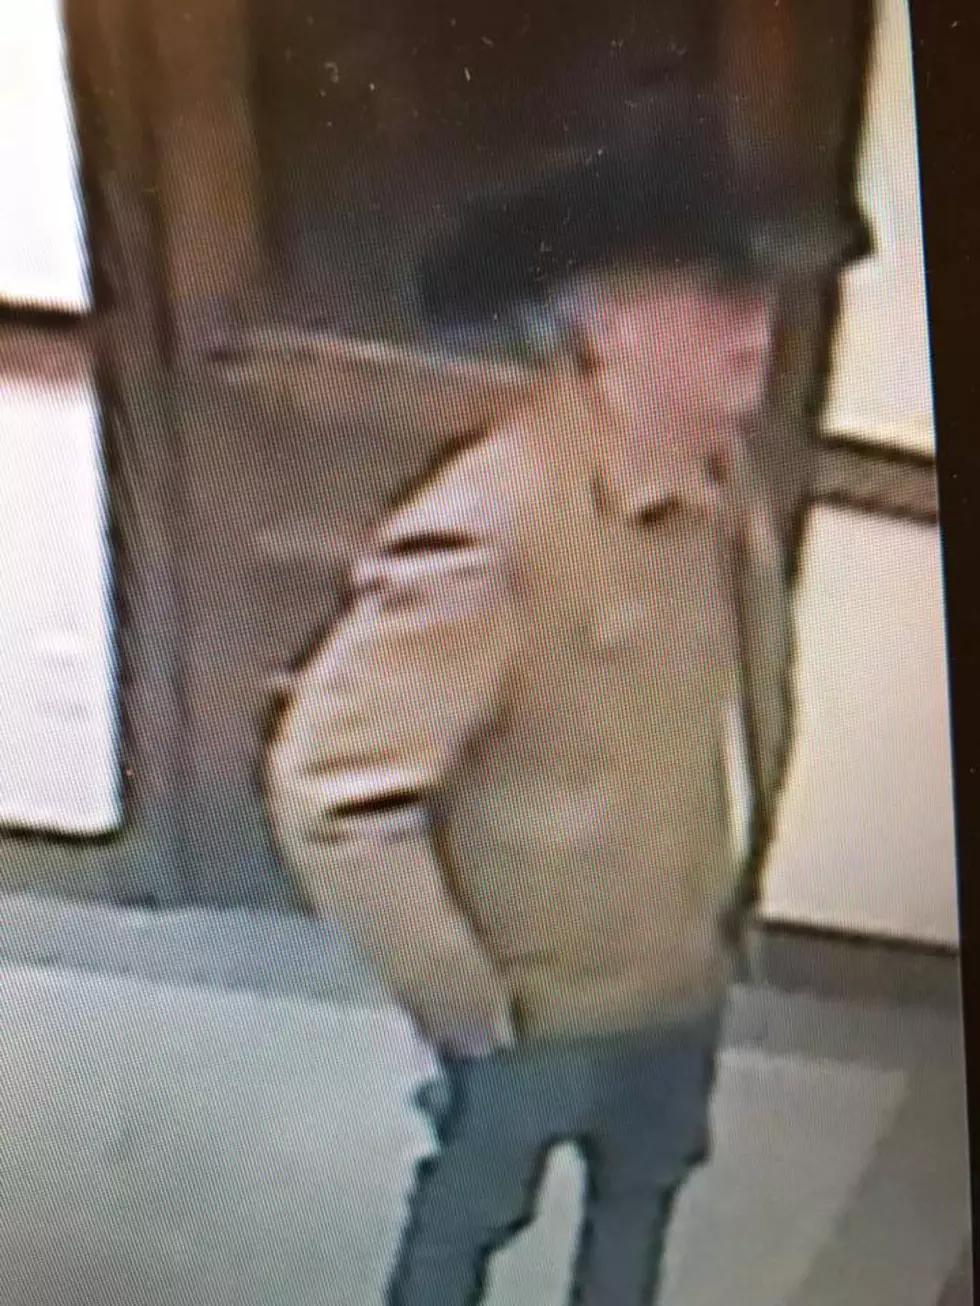 San Angelo Police Need Your Help to Identify Art Theft Suspect